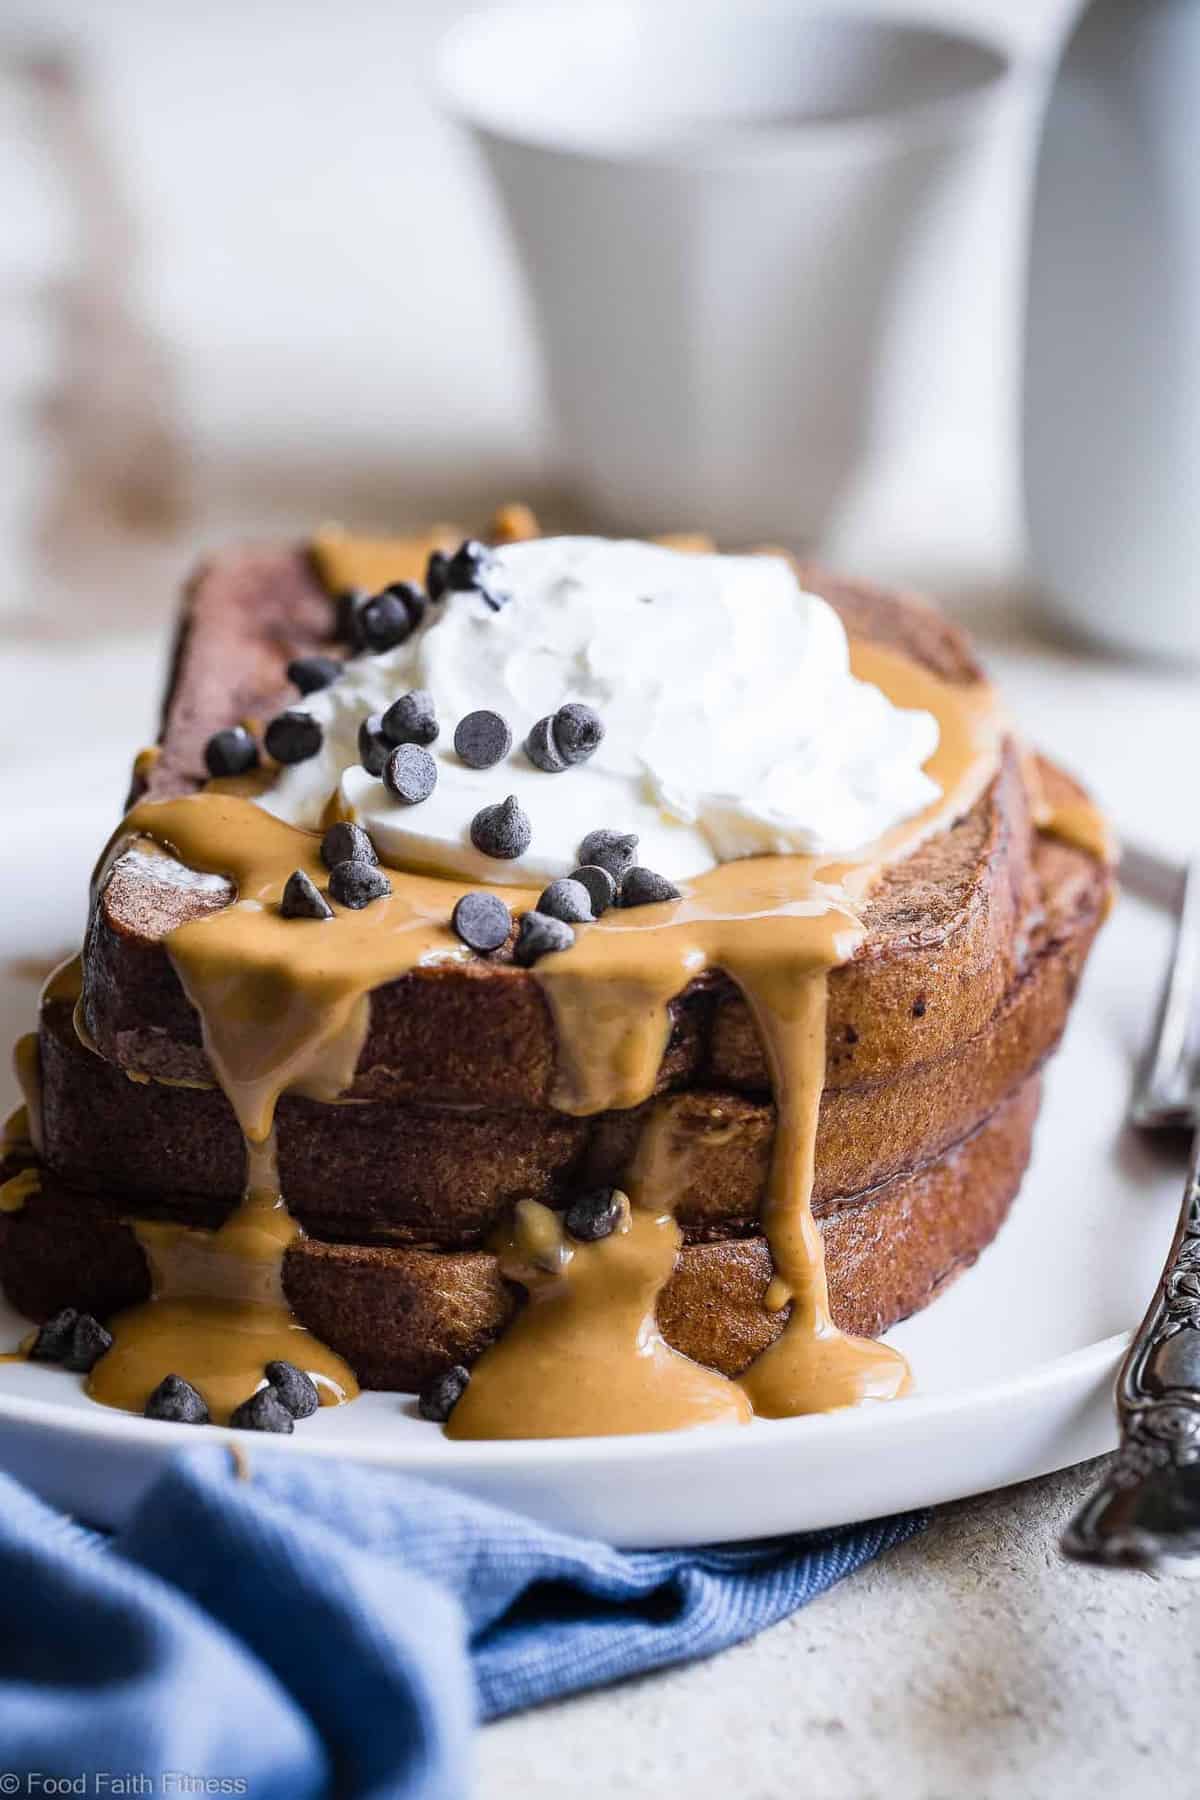 Chocolate Peanut Butter Healthy High Protein French Toast - Loaded with chocolate peanut butter goodness and 32g of protein! SO easy to make and has a gluten free and paleo friendly option! This chocolate peanut butter french toast will be your new favorite breakfast to keep you FULL! | #Foodfaithfitness | #Glutenfree #Healthy #Paleo #Breakfast #FrenchToast